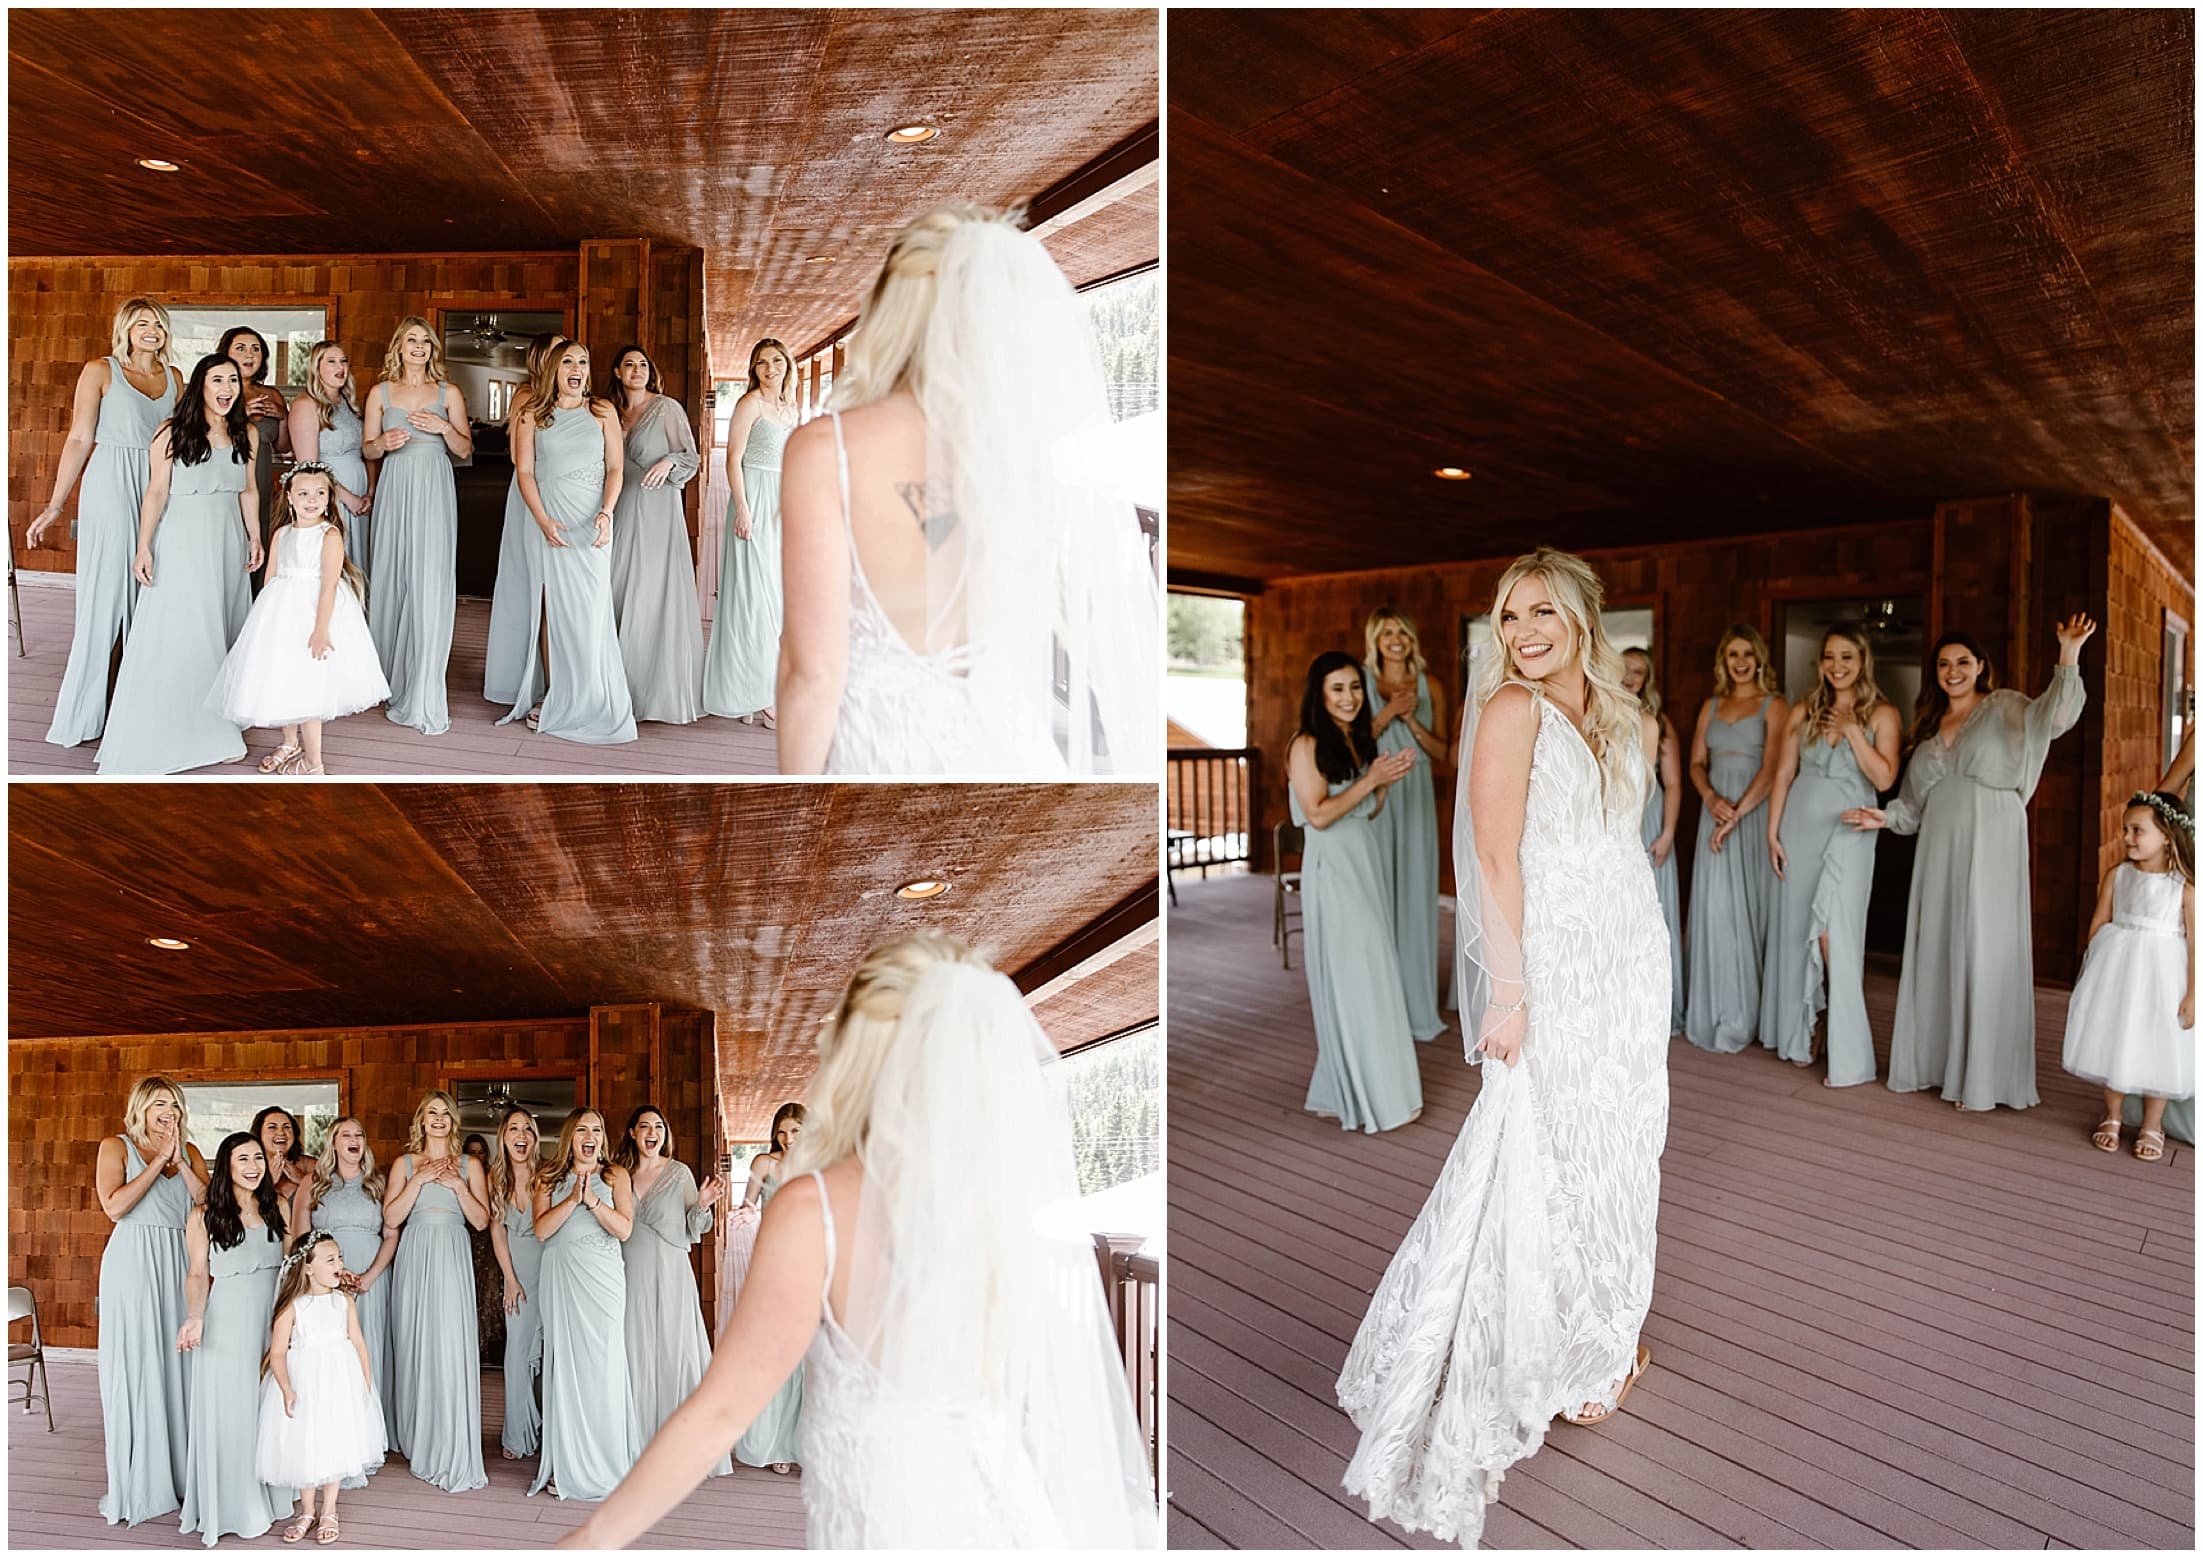 brides first look with bridesmaids, Aspen Lodge, Red River New Mexico, Red River New Mexico Wedding, Weddings in New Mexico, Destination mountain wedding, destination mountain elopement, elopements in new mexico, places to get married in new mexico, destination elopement photographer, mountain wedding photographer, new mexico wedding photographer, new mexico elopement photographer, brit nicole photography, cabin wedding, new mexico cabin wedding, mountain landscape for wedding, small intimate mountain wedding, small intimate river wedding, wedding photographer in new mexico, junebug weddings, the knot, wedding wire, 41 productions with lindsay gomez, dallas texas bride, DJ Allen Gallegos, Tao Cakes, New Mexico Wedding planner karen kelly, barnes jewelry, Lillian West bridal dress, Lang’s Bridal, enchanted florist wedding flowers, places to get married in texas, texas wedding photographer, texas elopement photographer, forest wedding, forest elopement, wooded area for wedding, wooded elopement, elopement in the woods